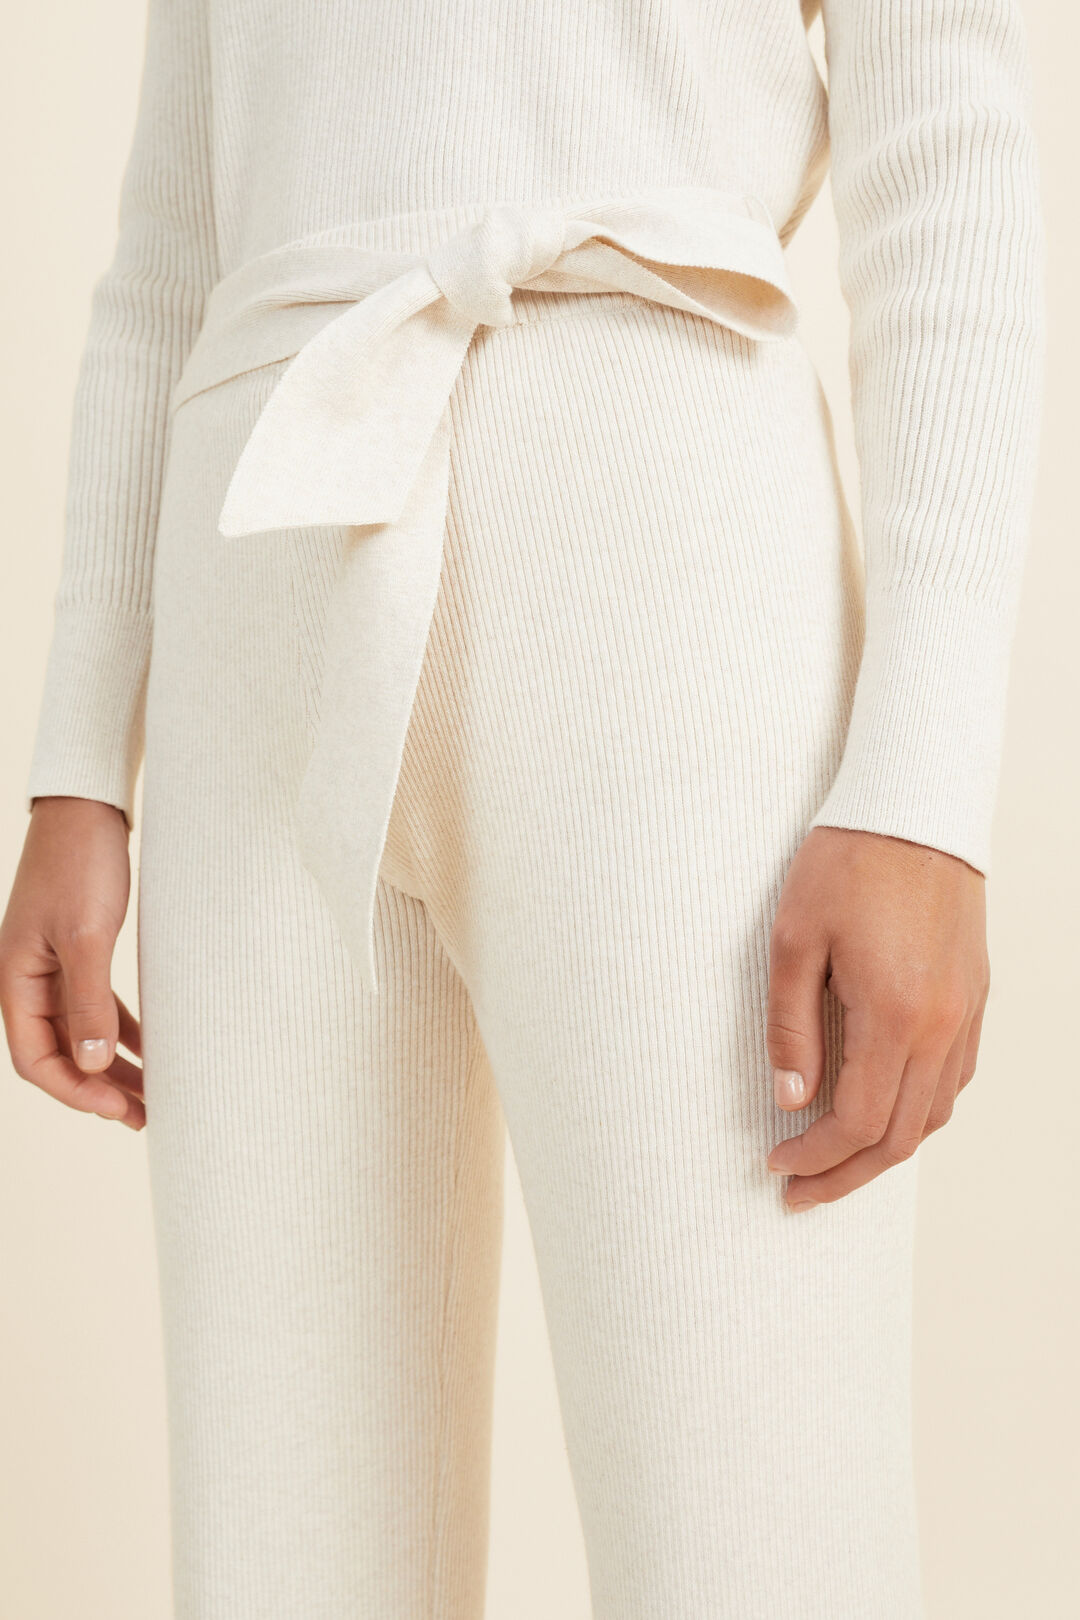 Relaxed Knit Tie Pant   Oat Marle  hi-res